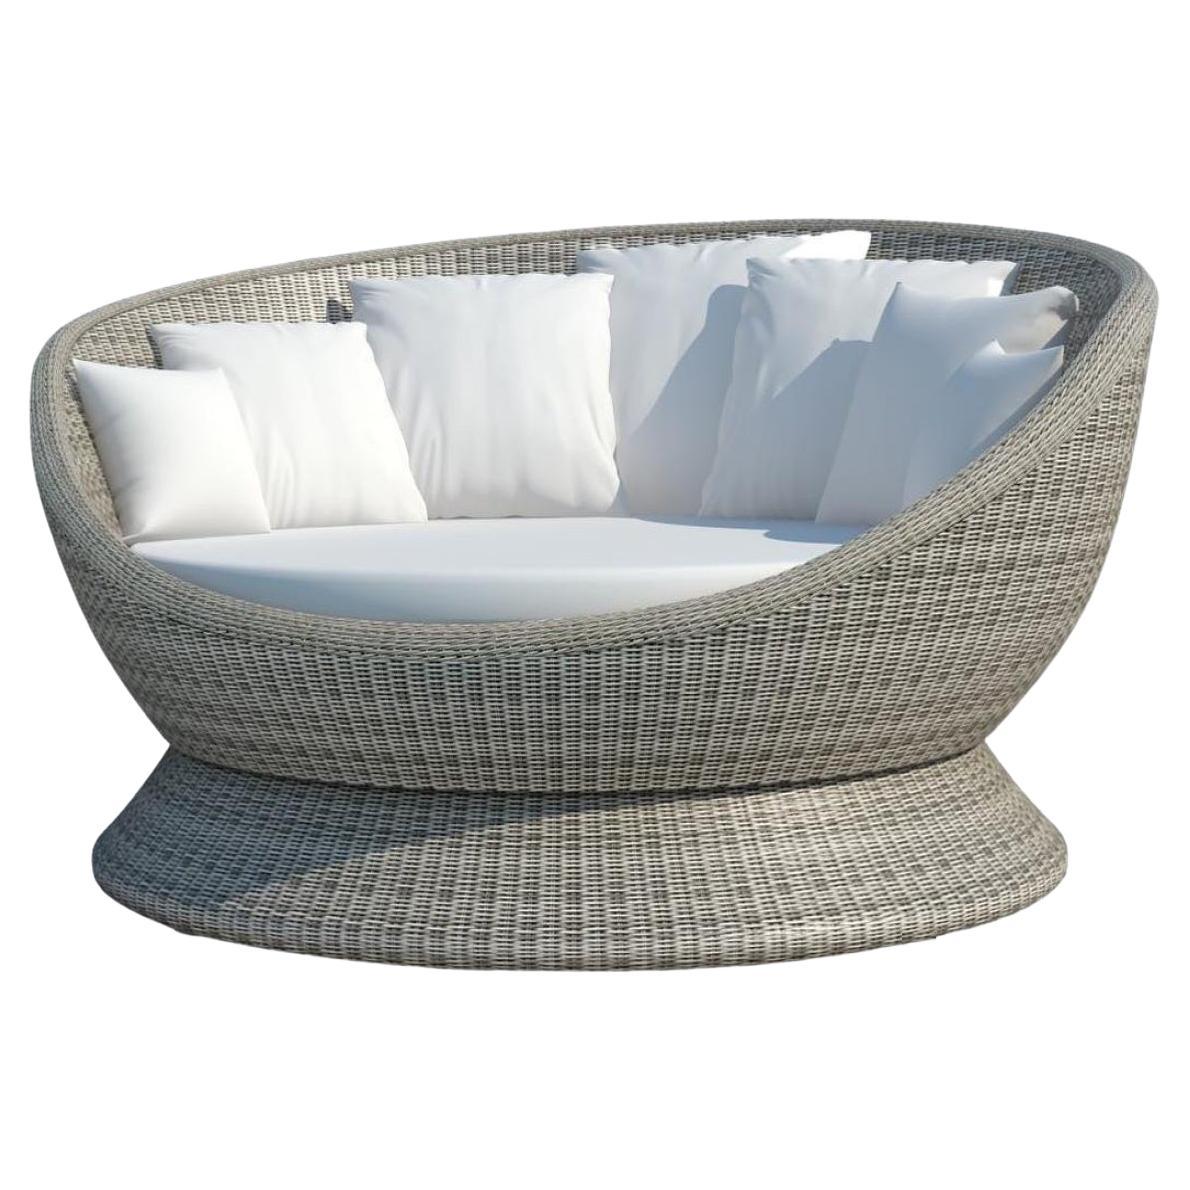 360° Rotating Outdoor Daybed In Stone Washed Wicker